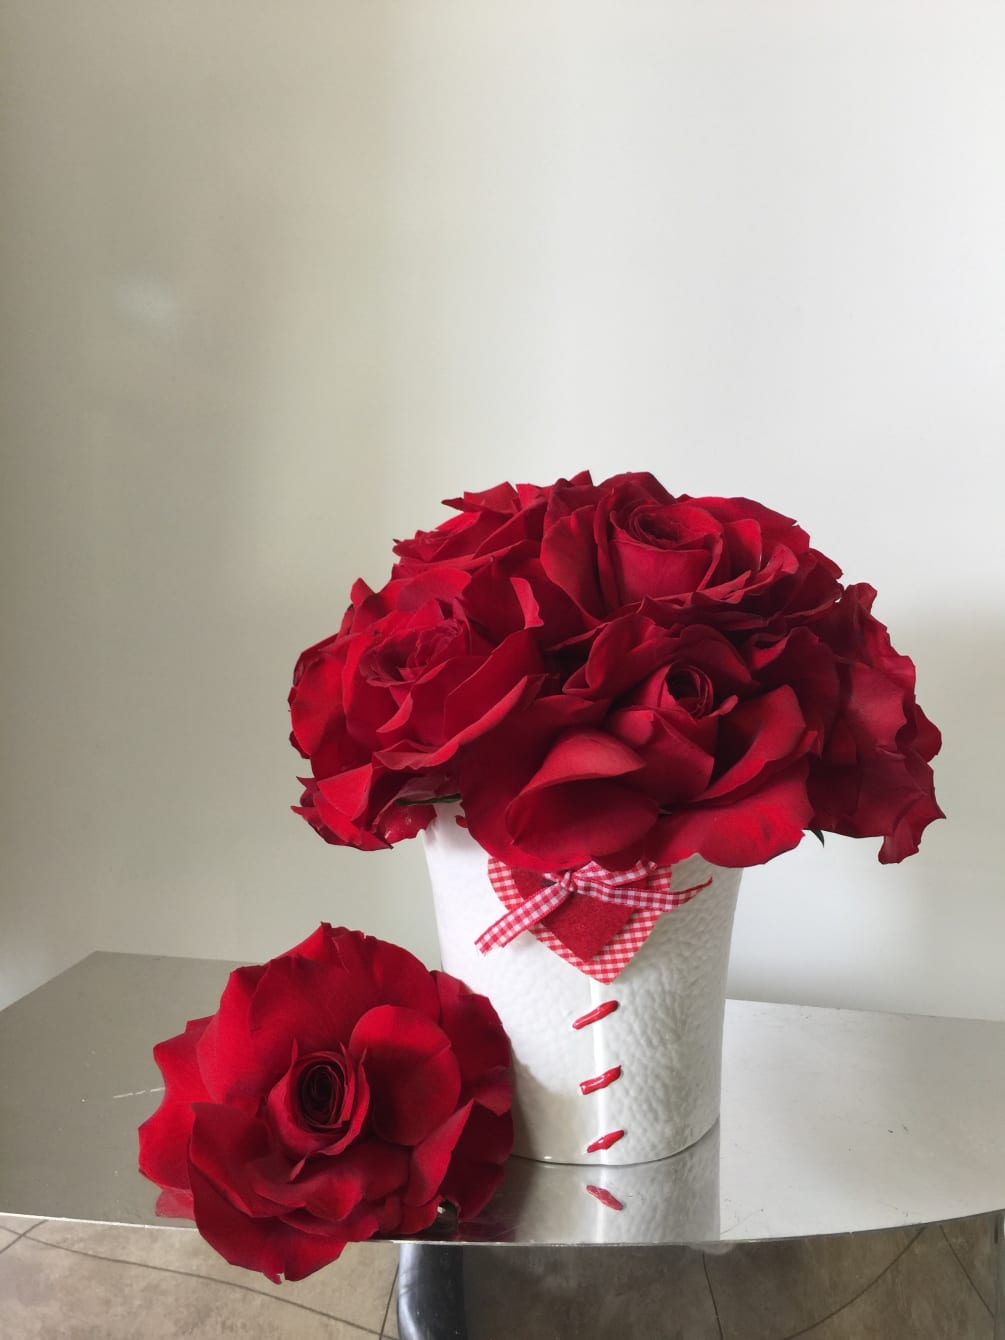 Petite desk arrangement with lovely red roses